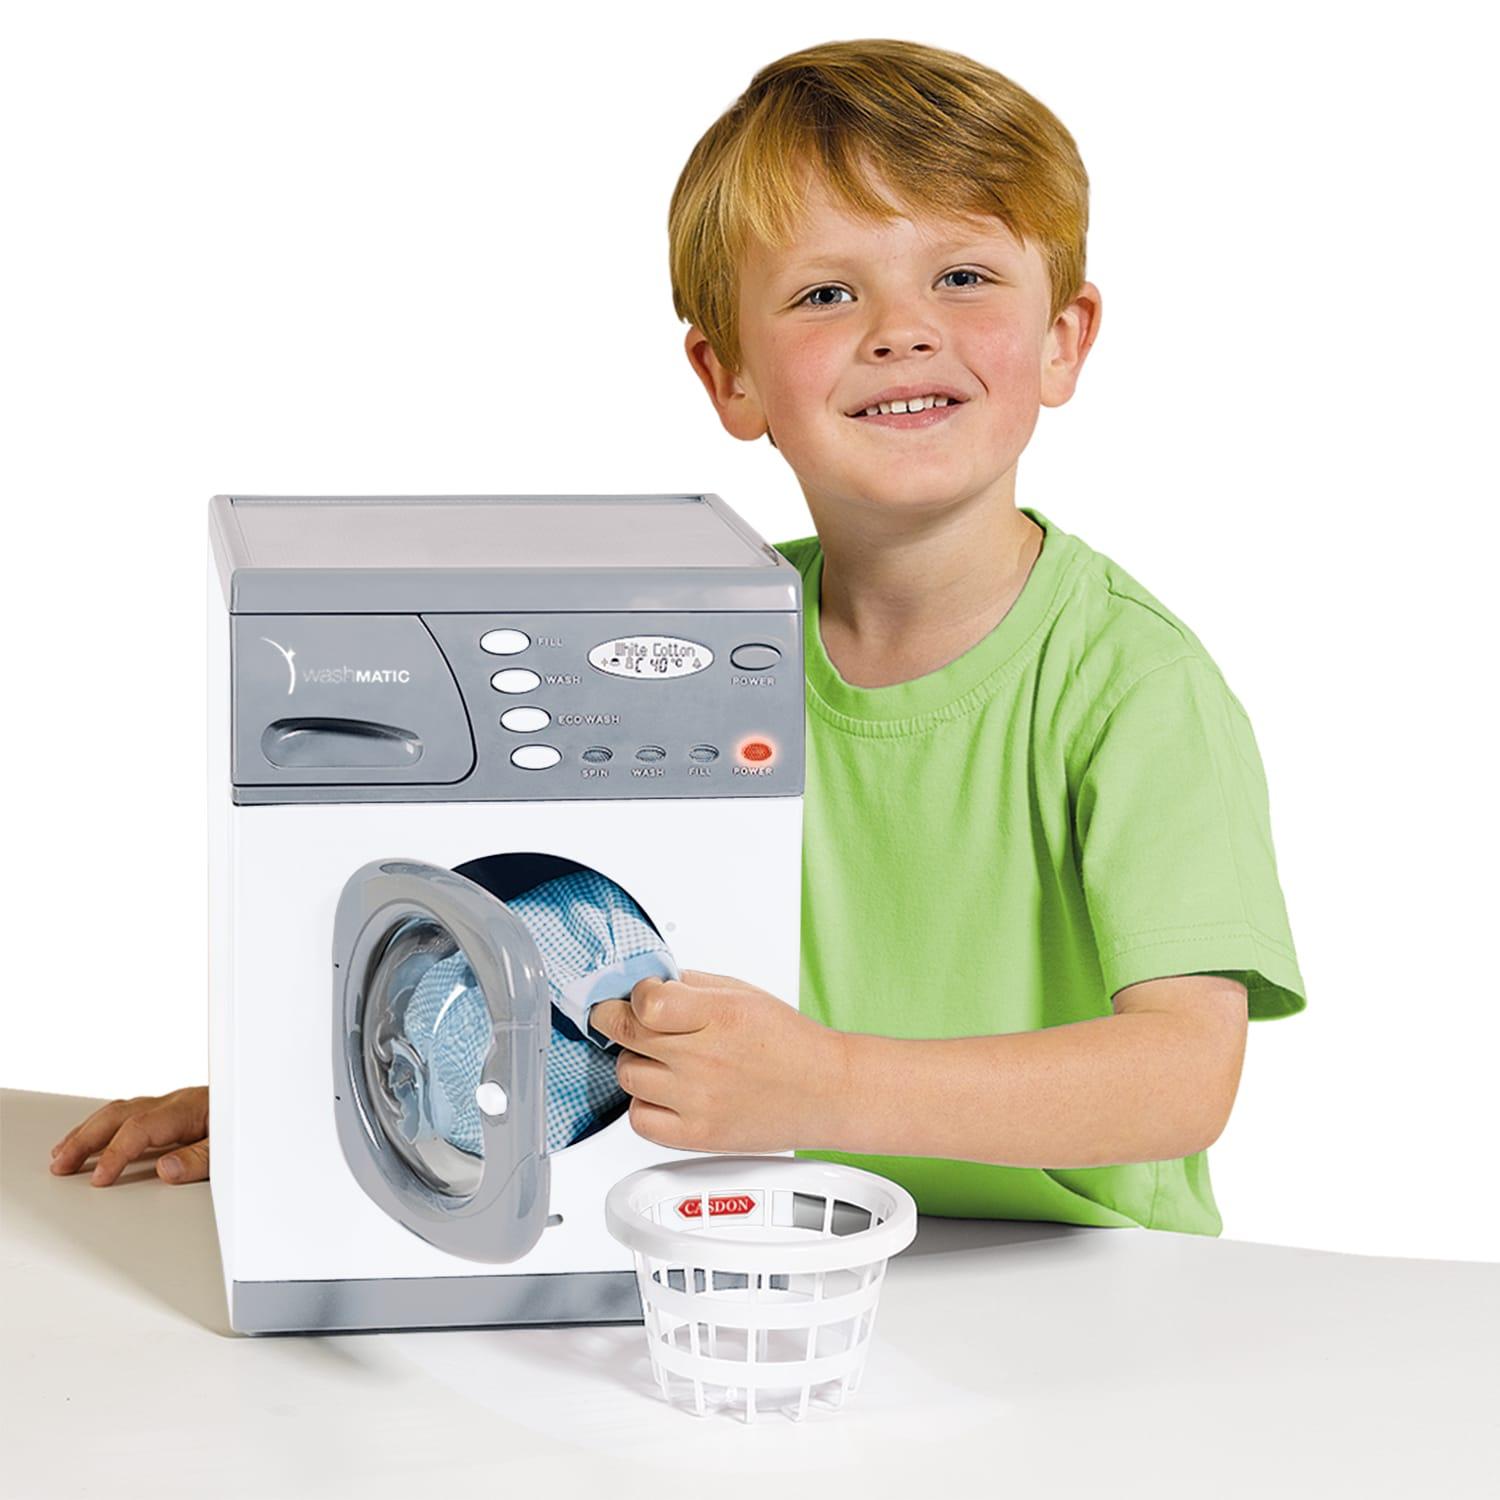 Casdon 476 Toy Hotpoint Electronic Washing Machine Toy for sale online